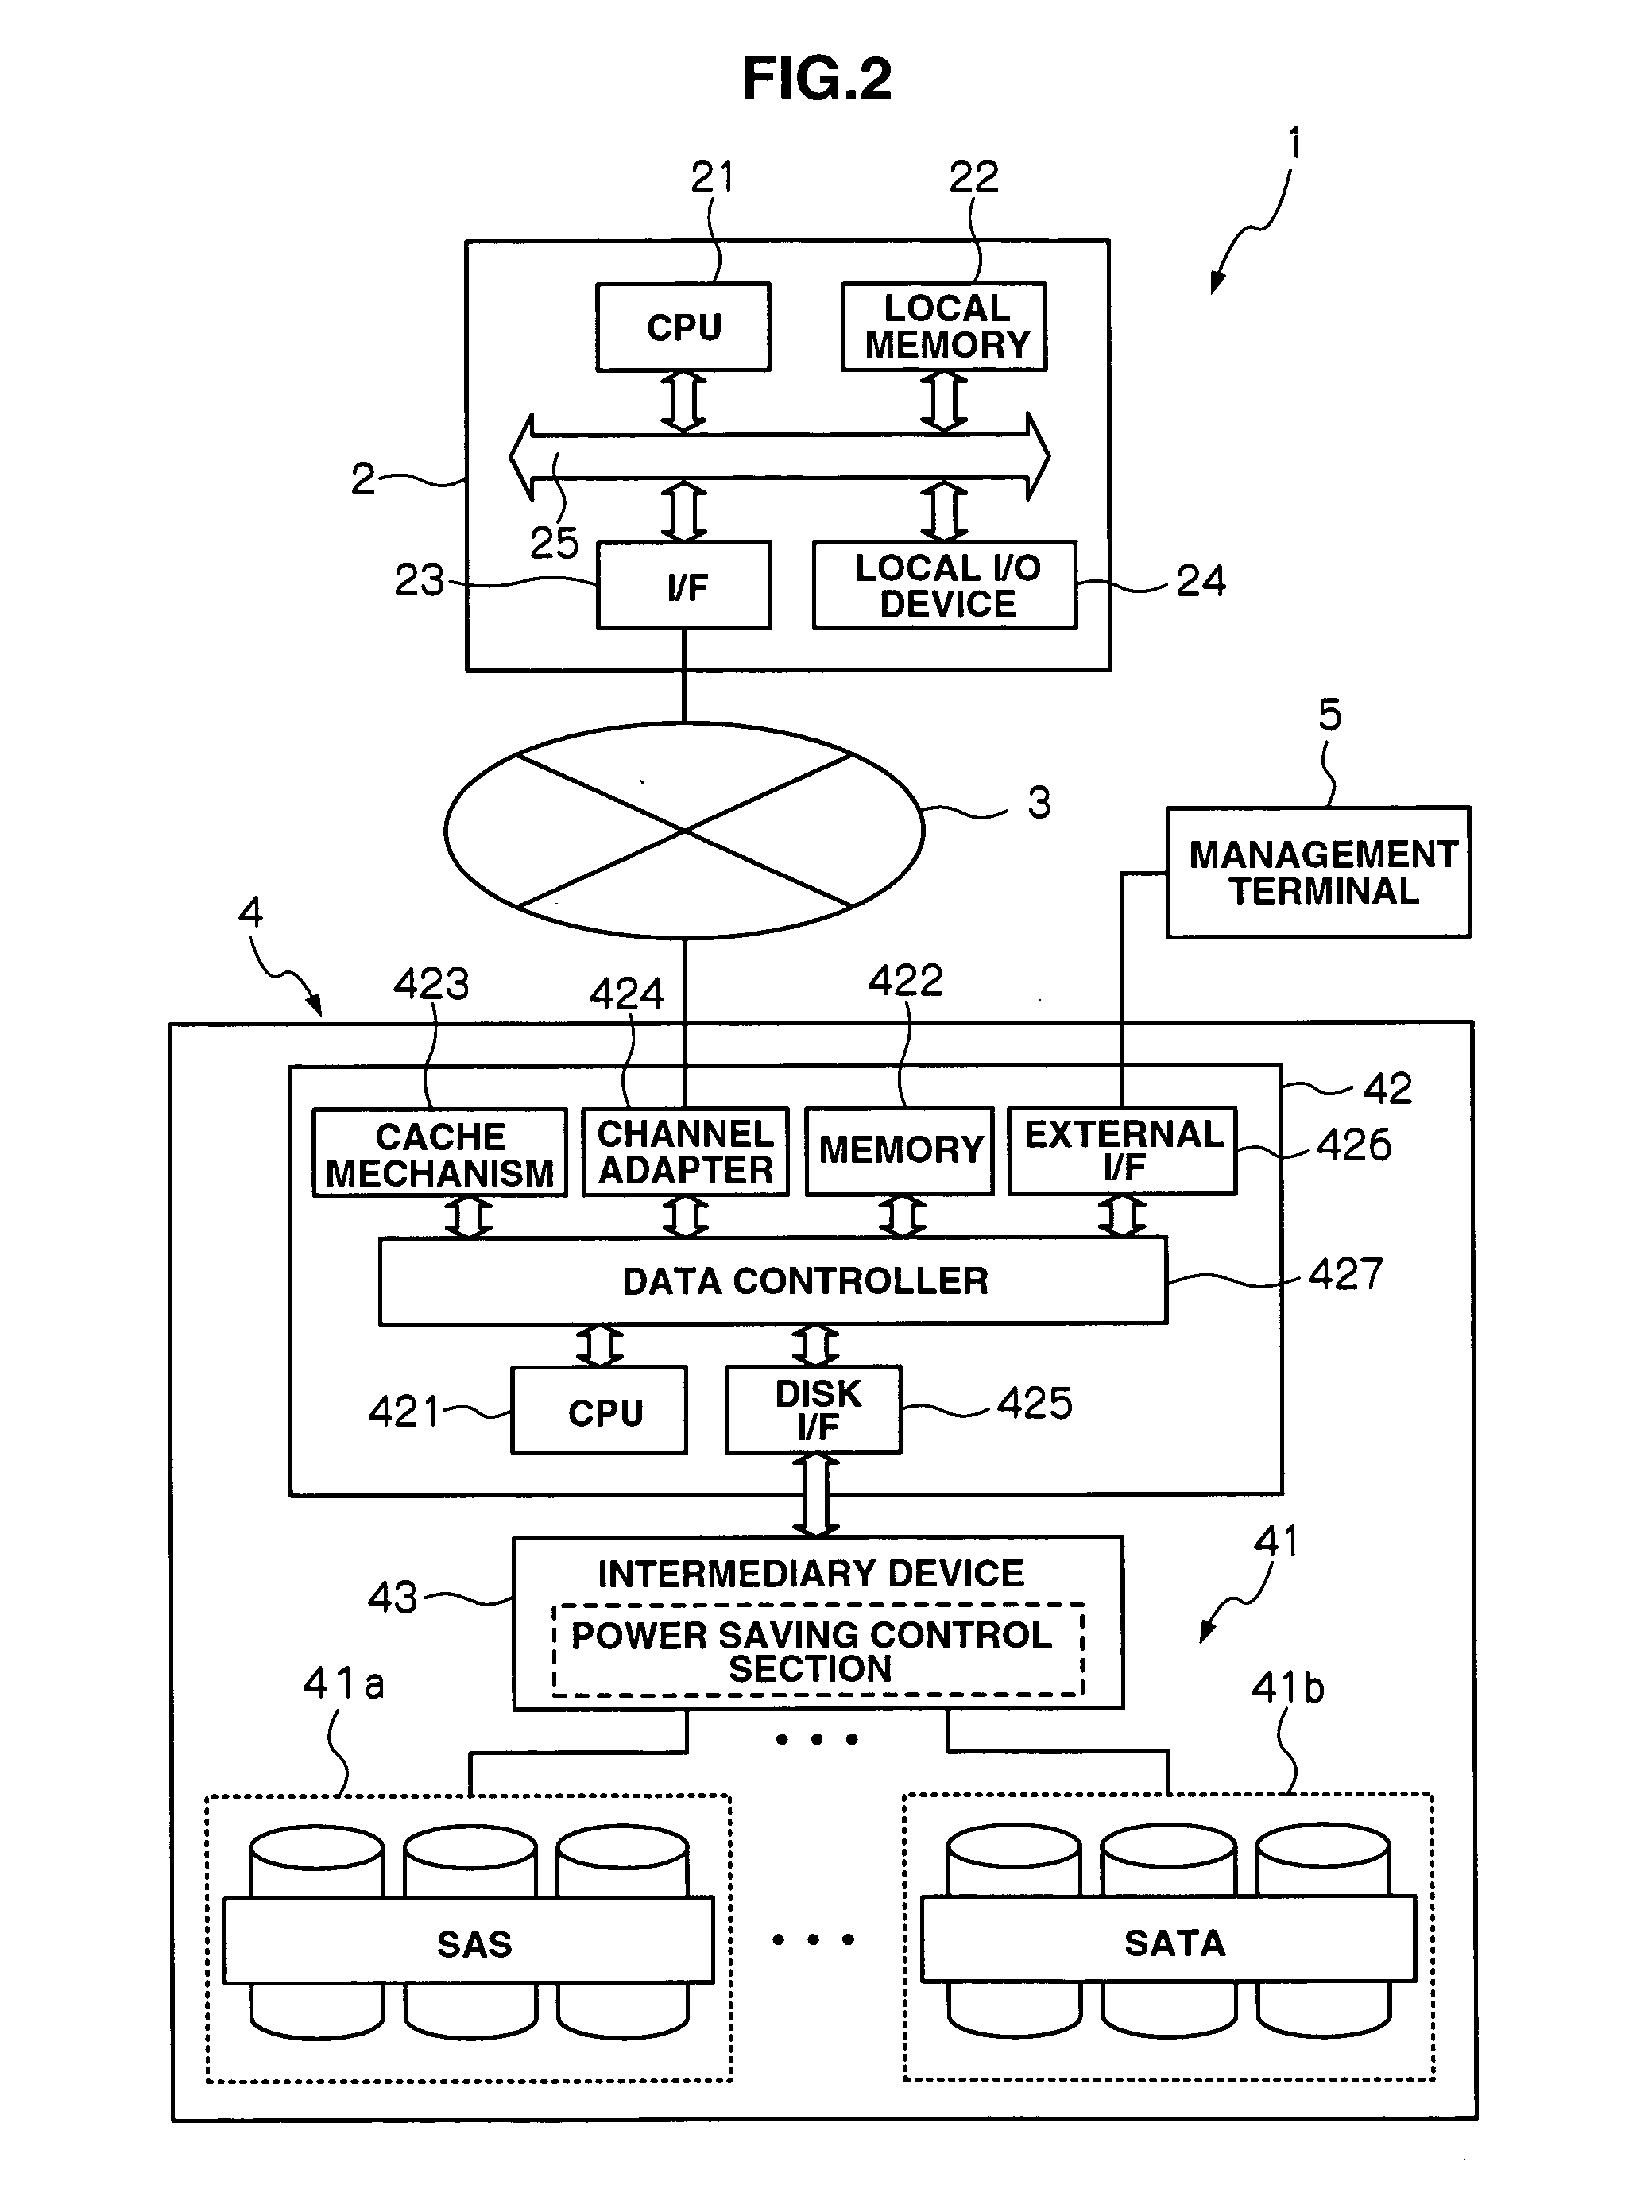 Storage apparatus and a data management method employing the storage apparatus